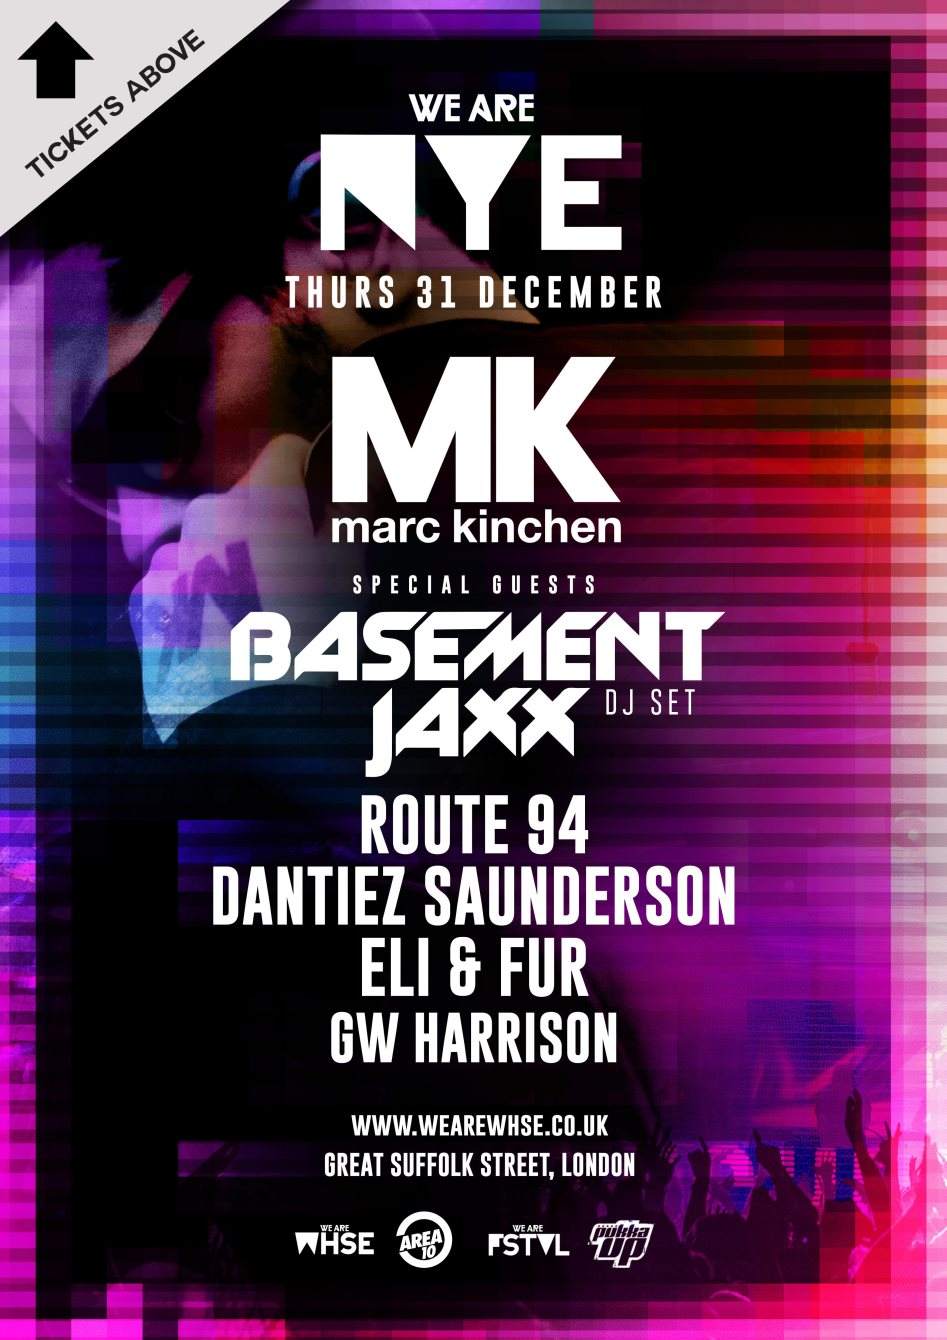 We Are Whse presents MK with Basement Jaxx, Route 94 & More - Página frontal